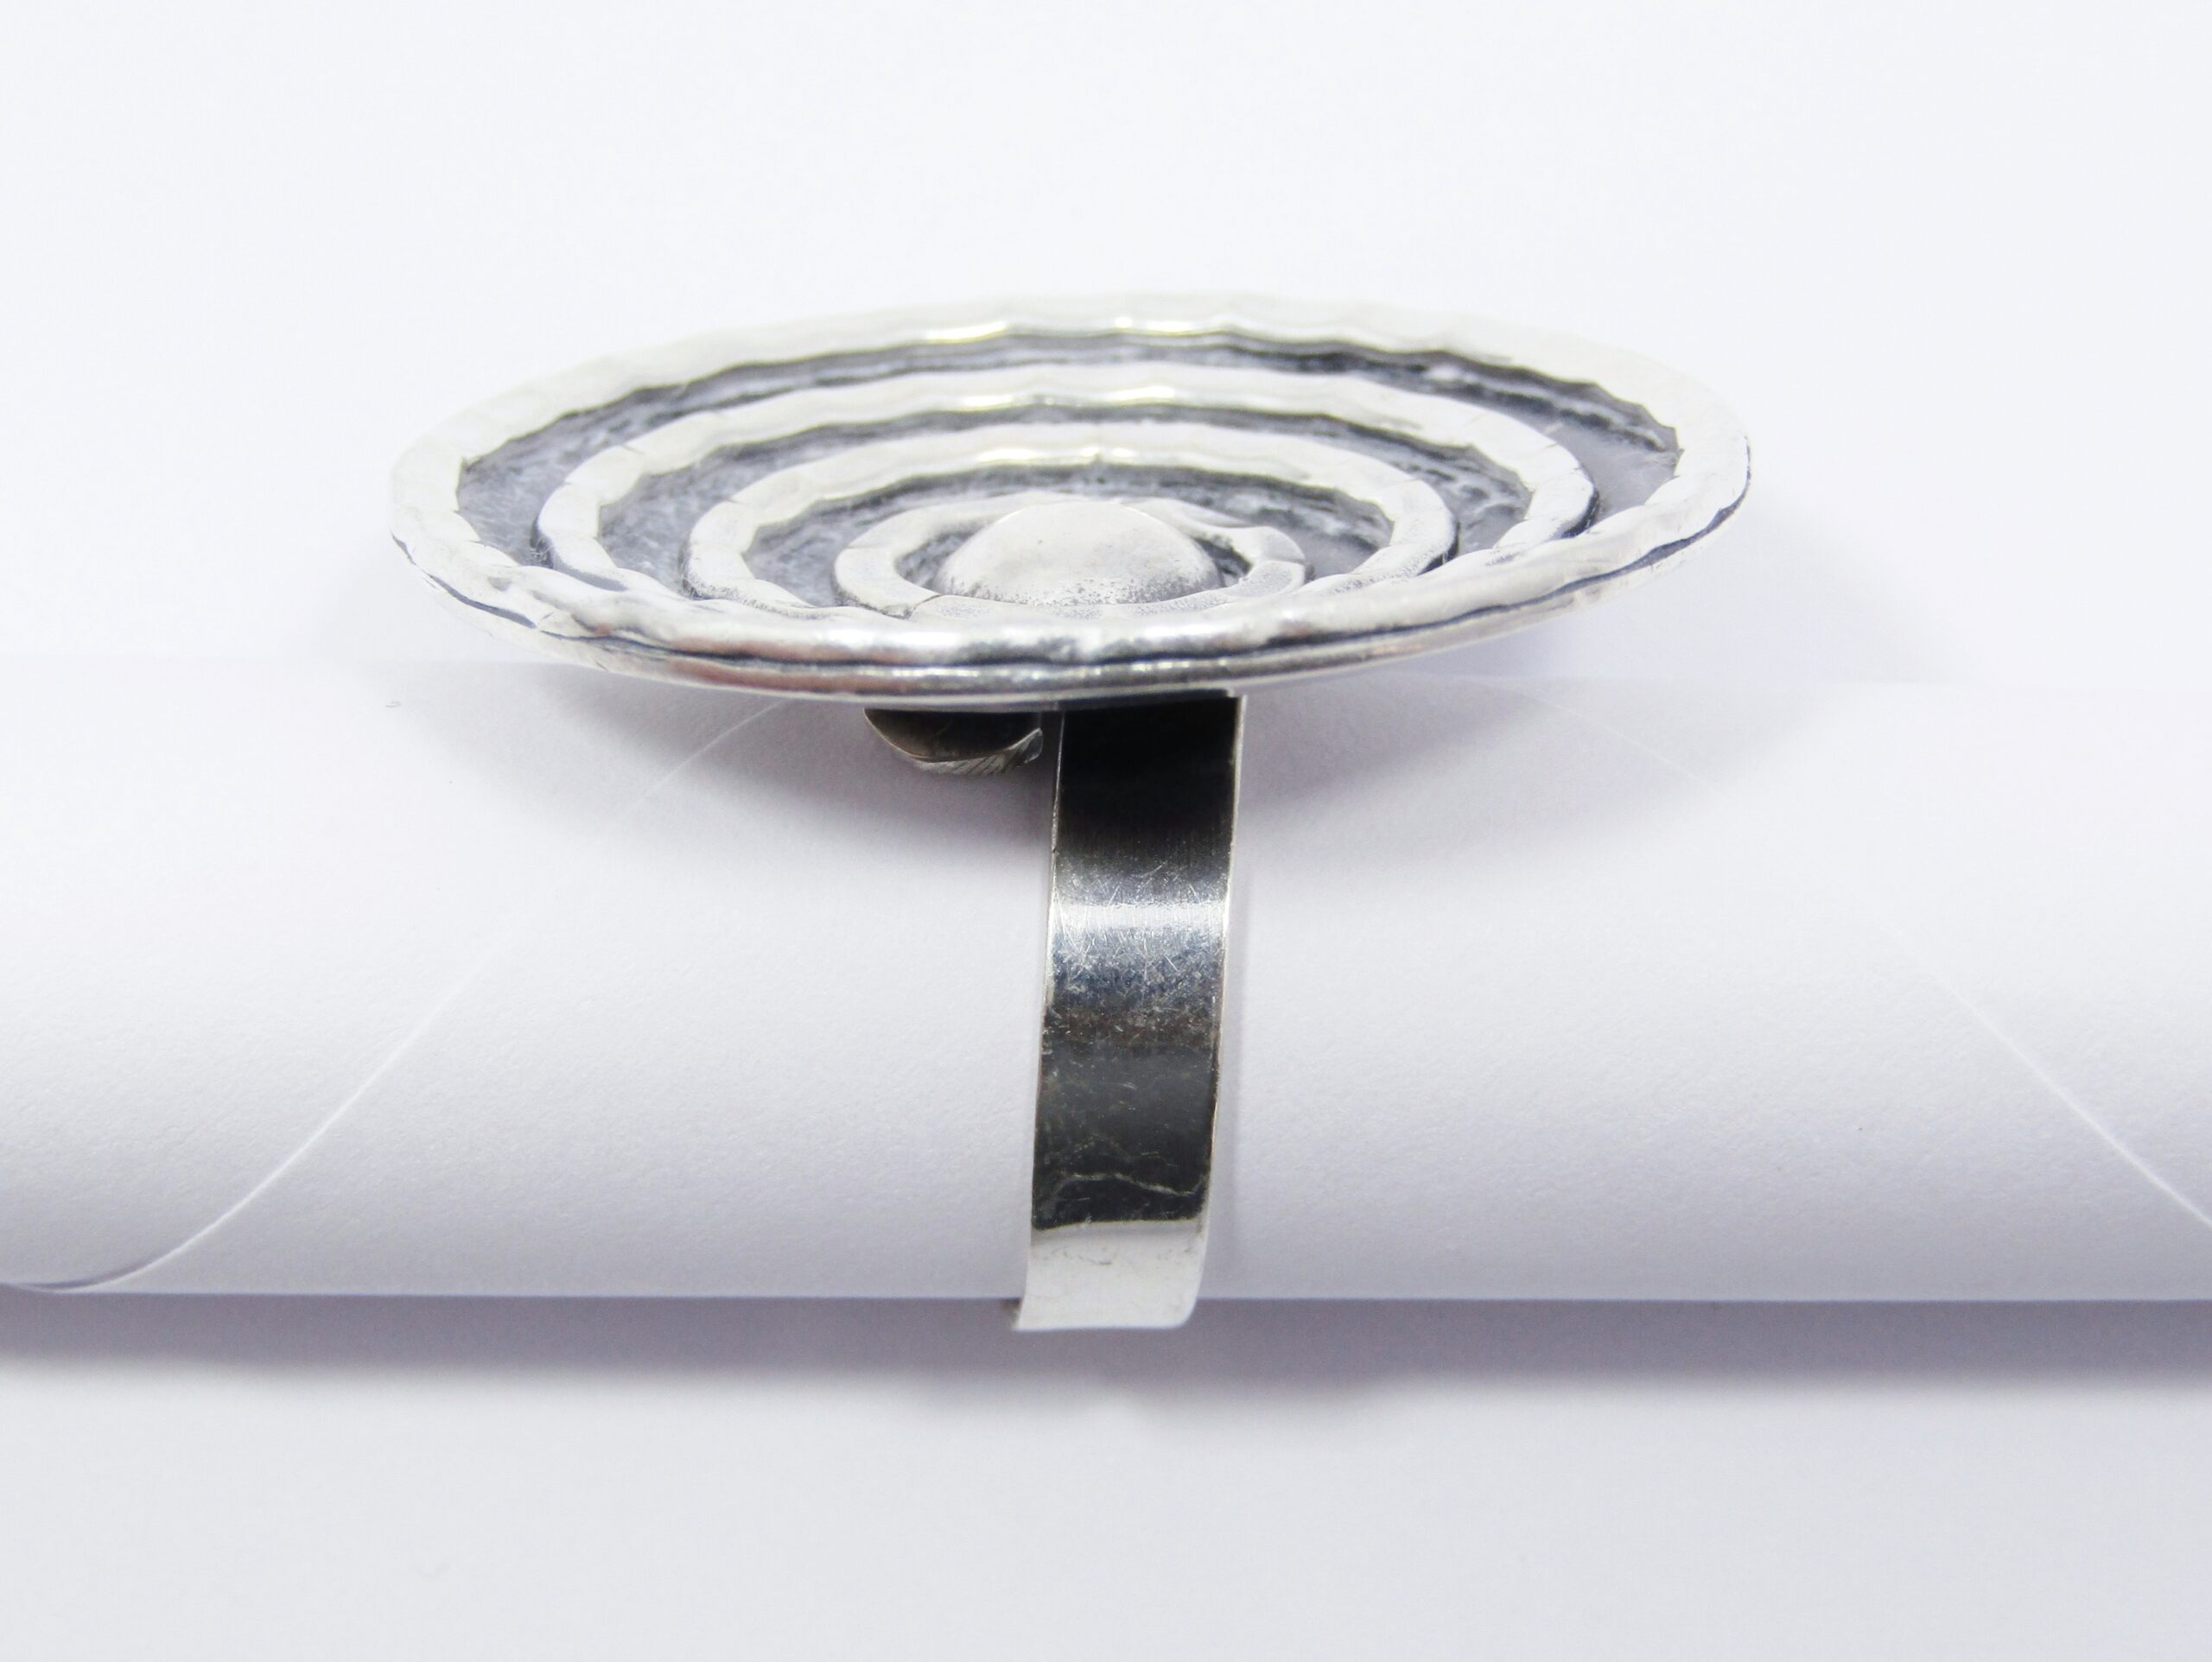 A Stunning Large Round Textured Ring with a Open-ended Band In Sterling Silver.